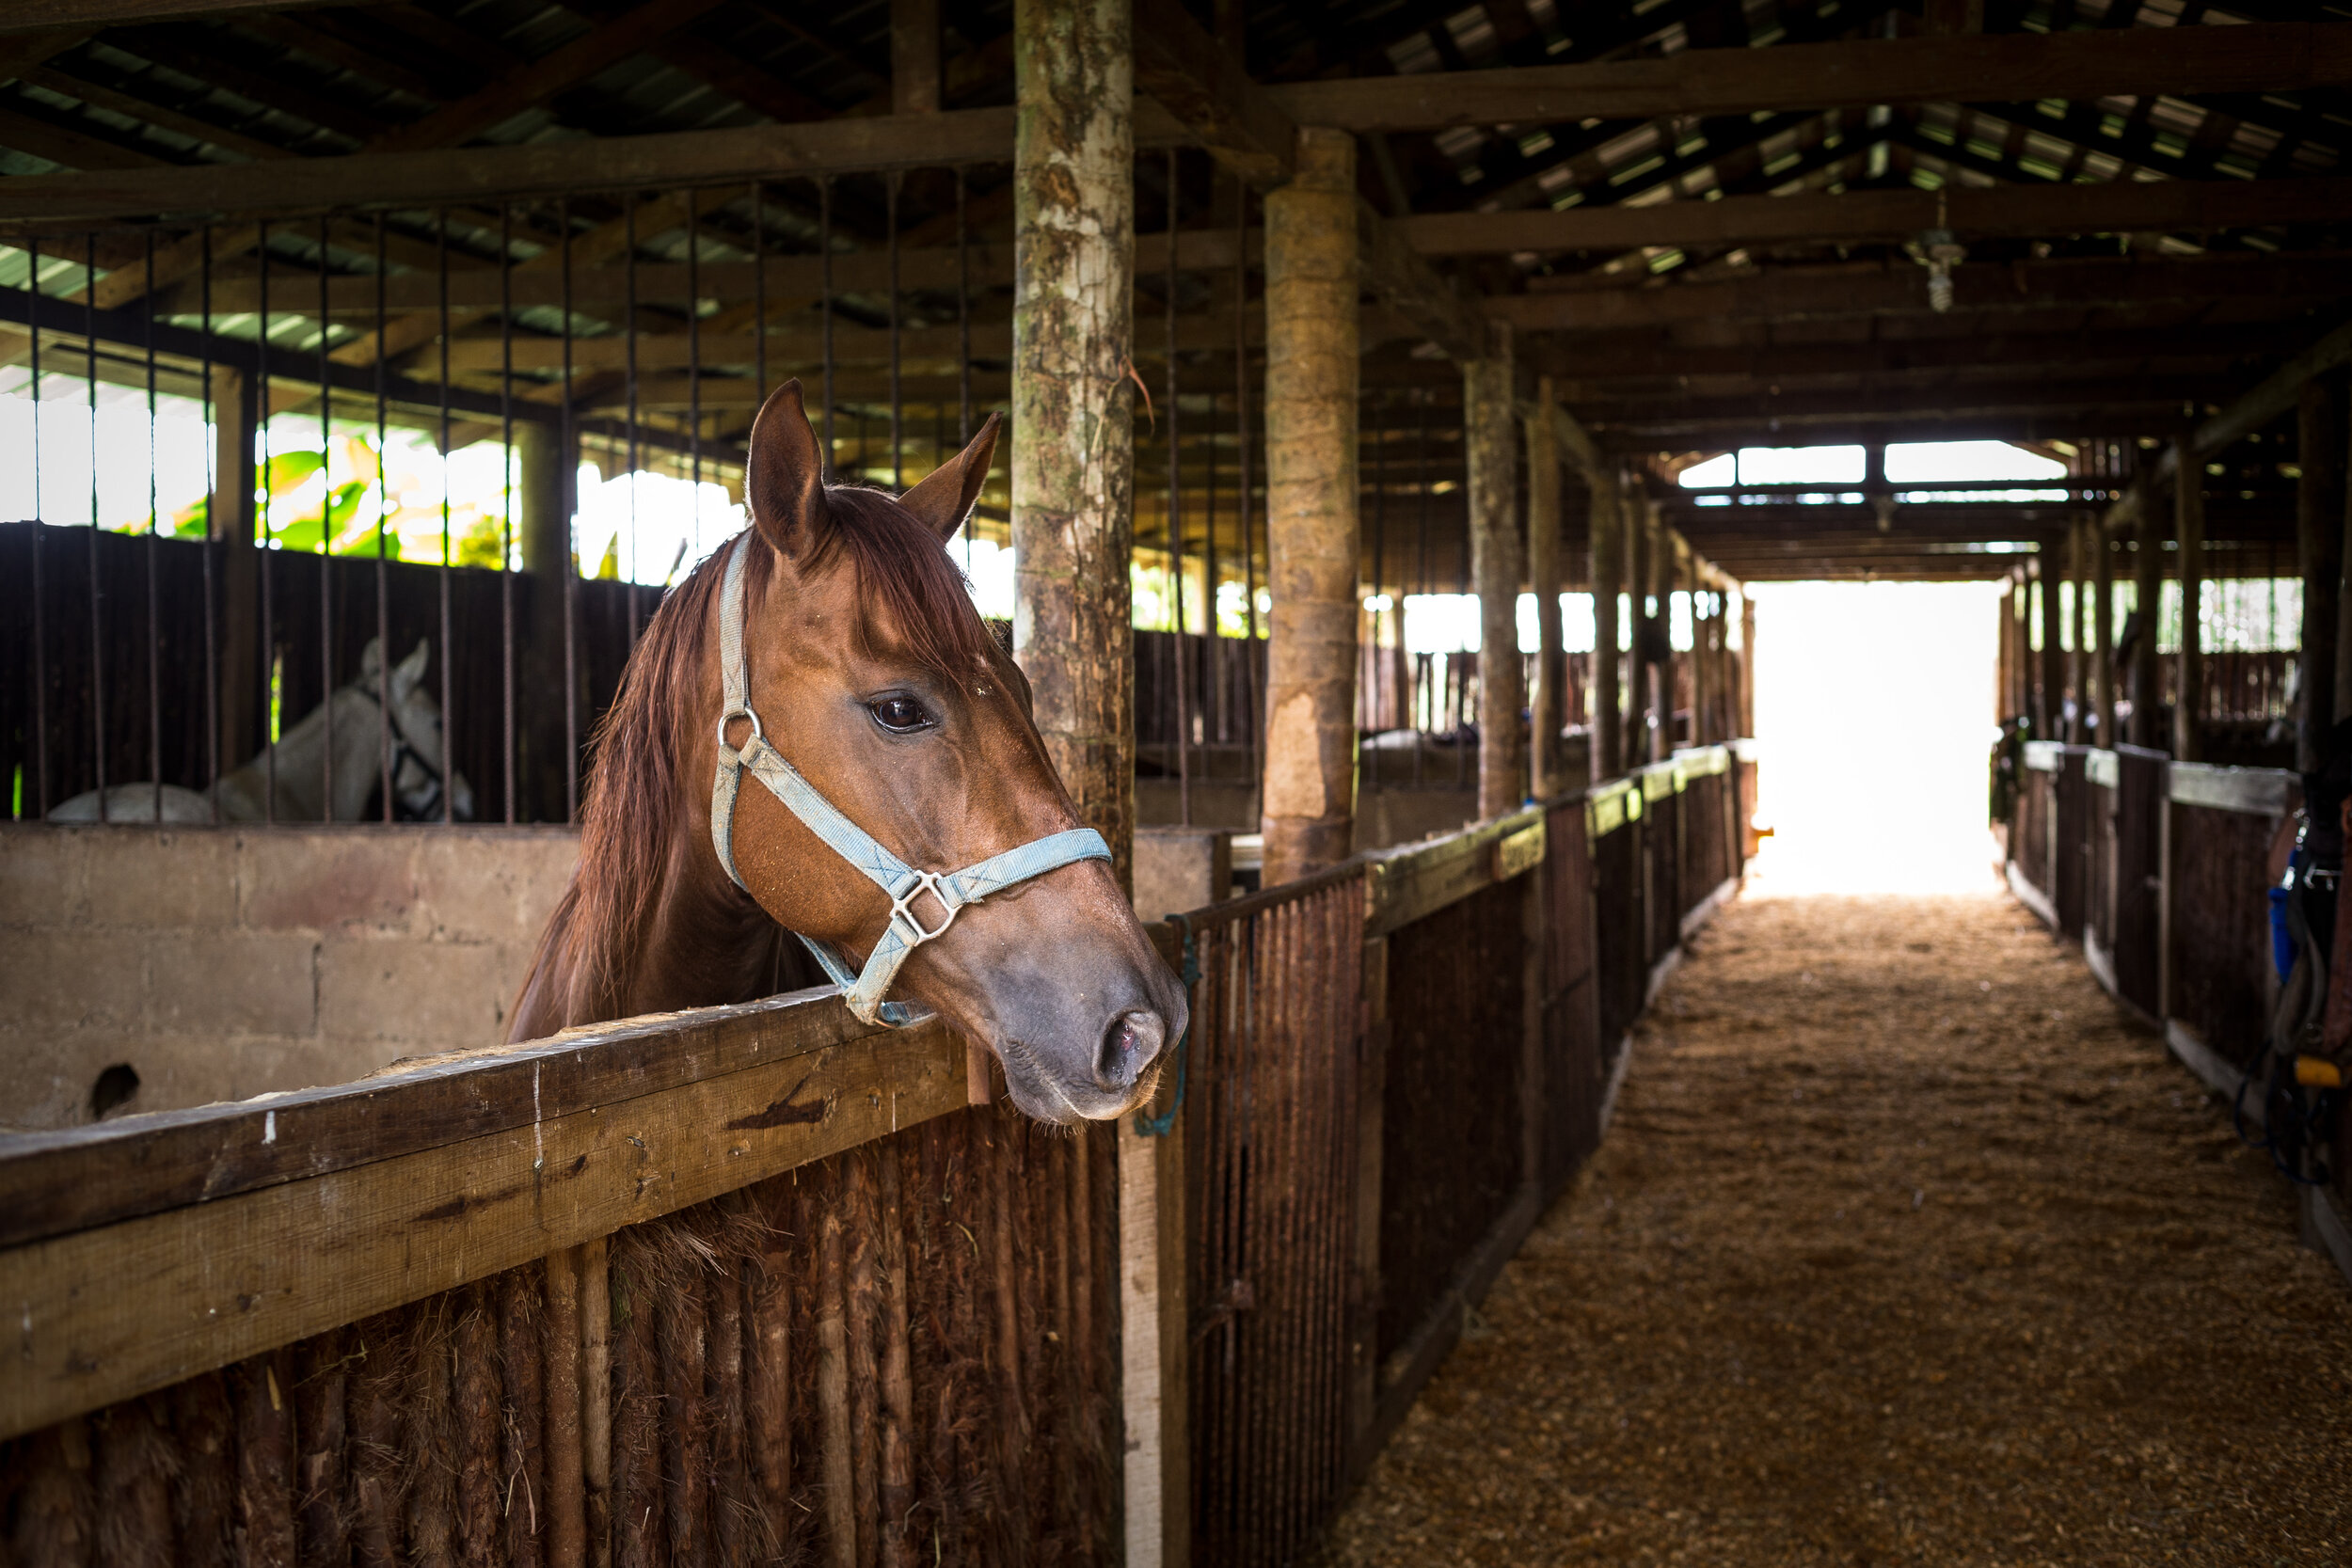   A look into the stables at Blancaneaux Lodge (photo credit: The Family Coppola Hideaways)  